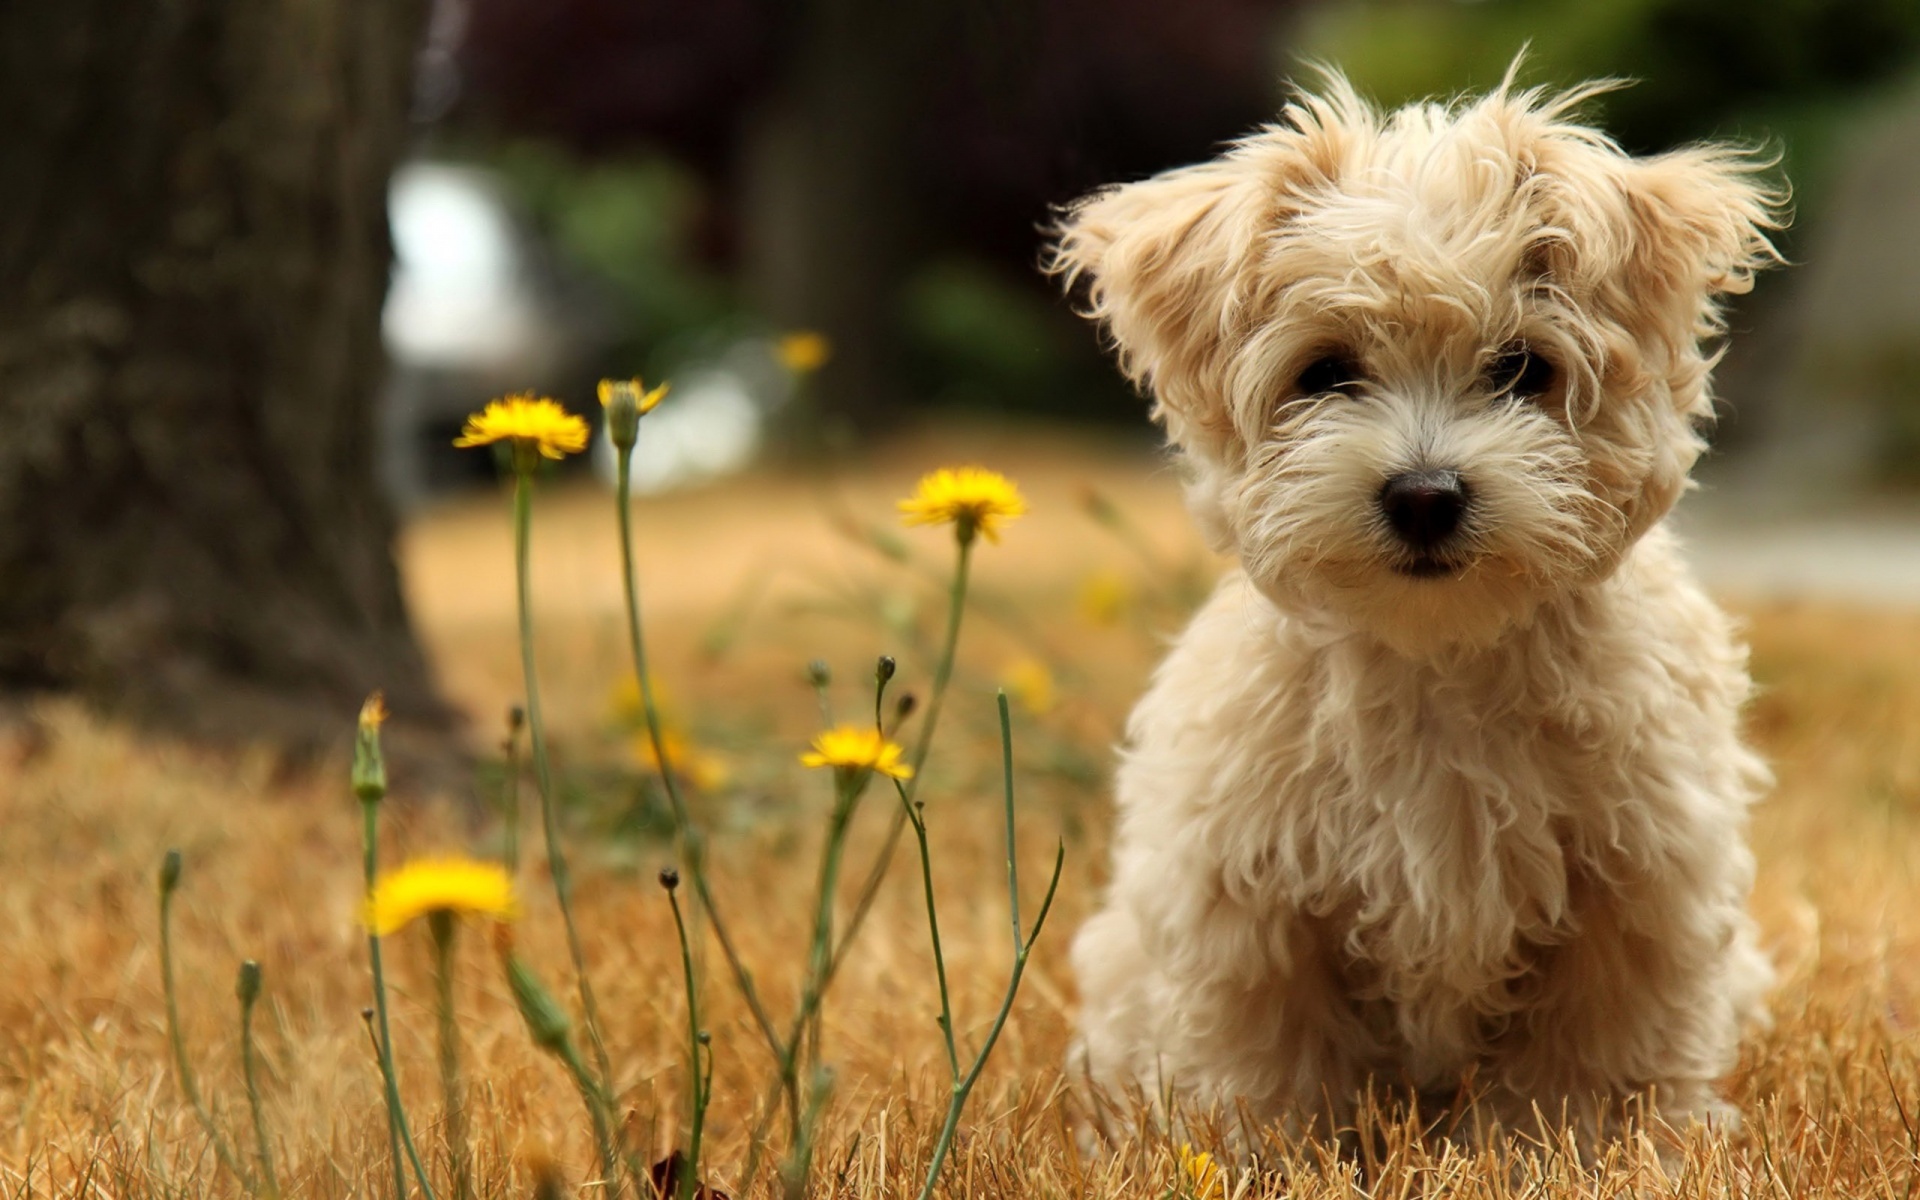 Cute Dog Pictures on The Garden